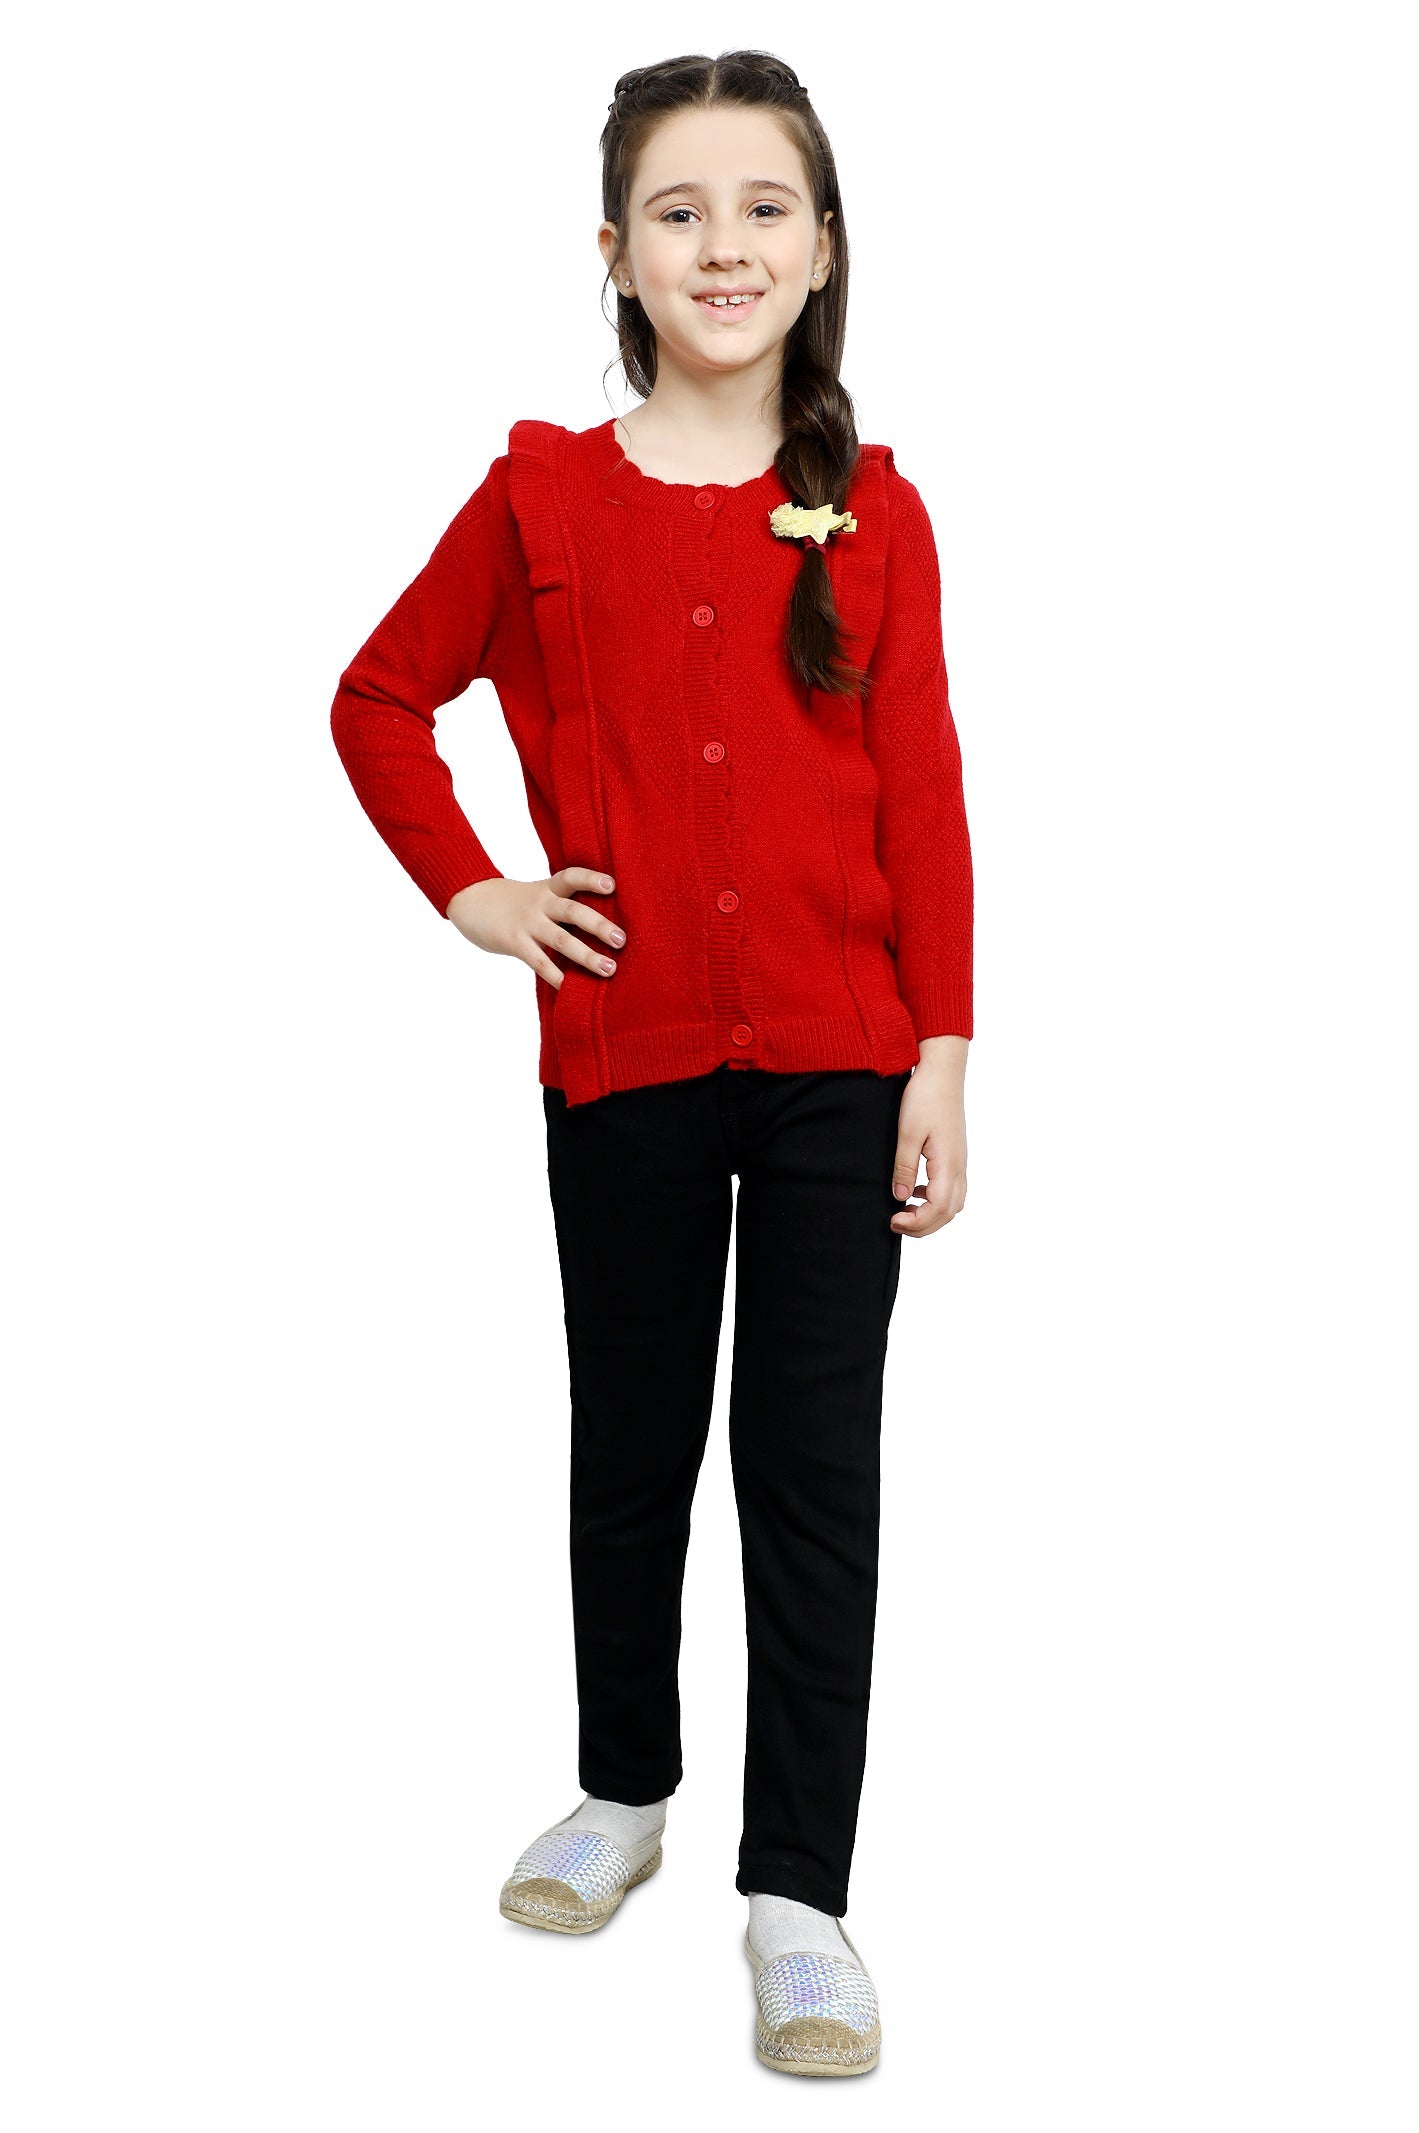 Girls Sweater SKU: KGE-0160-RED - Diners